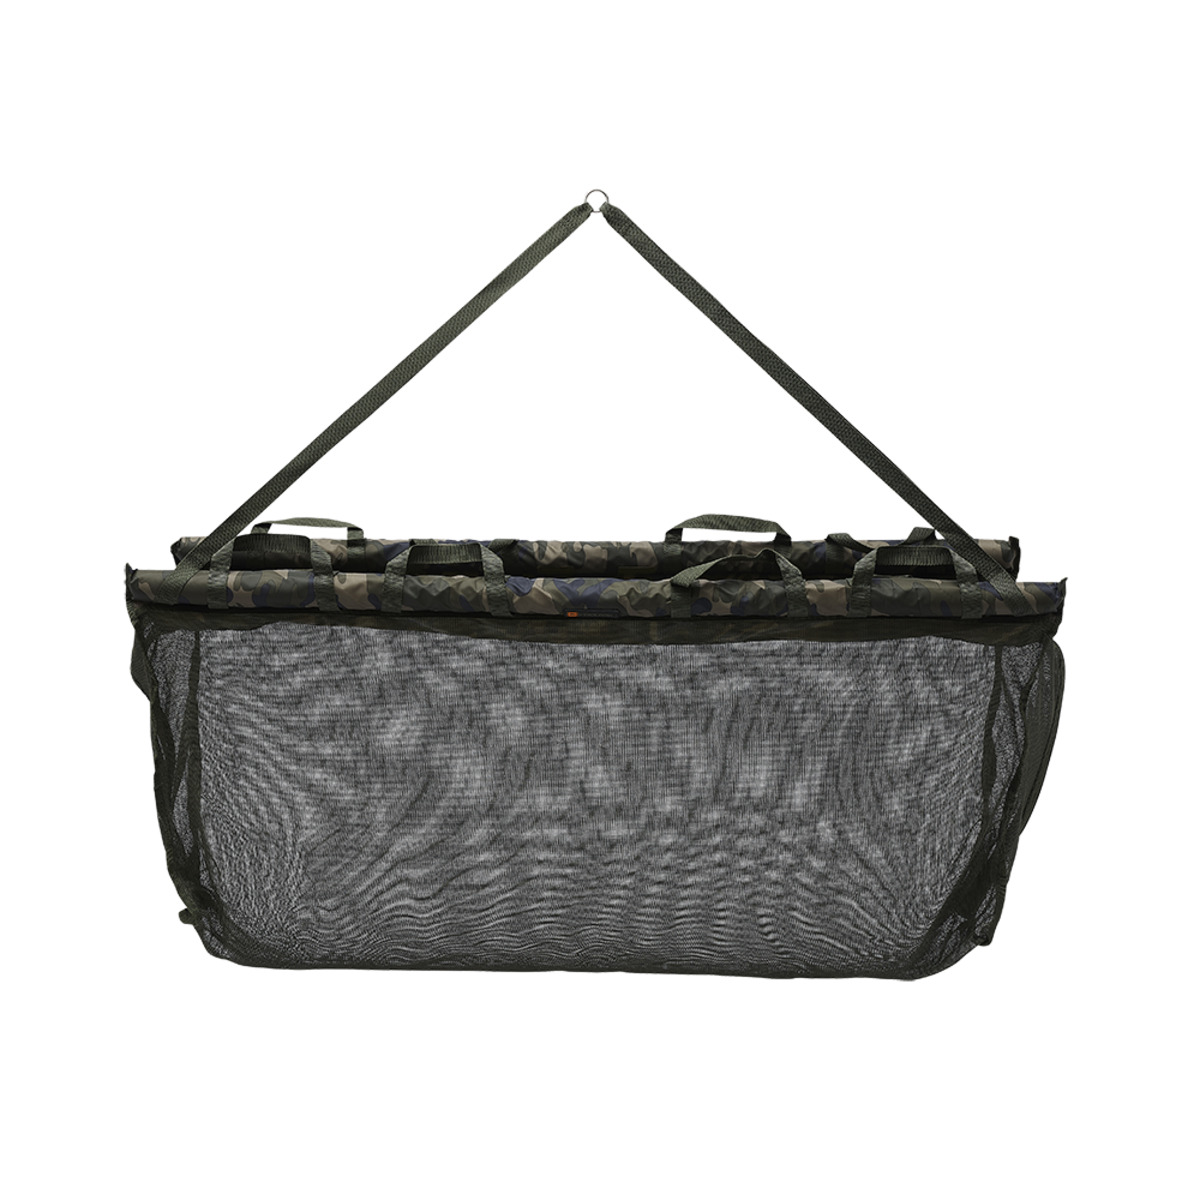 Prologic Inspire S/s Floating Retainer/weigh Sling - XL 120X55CM CAMO